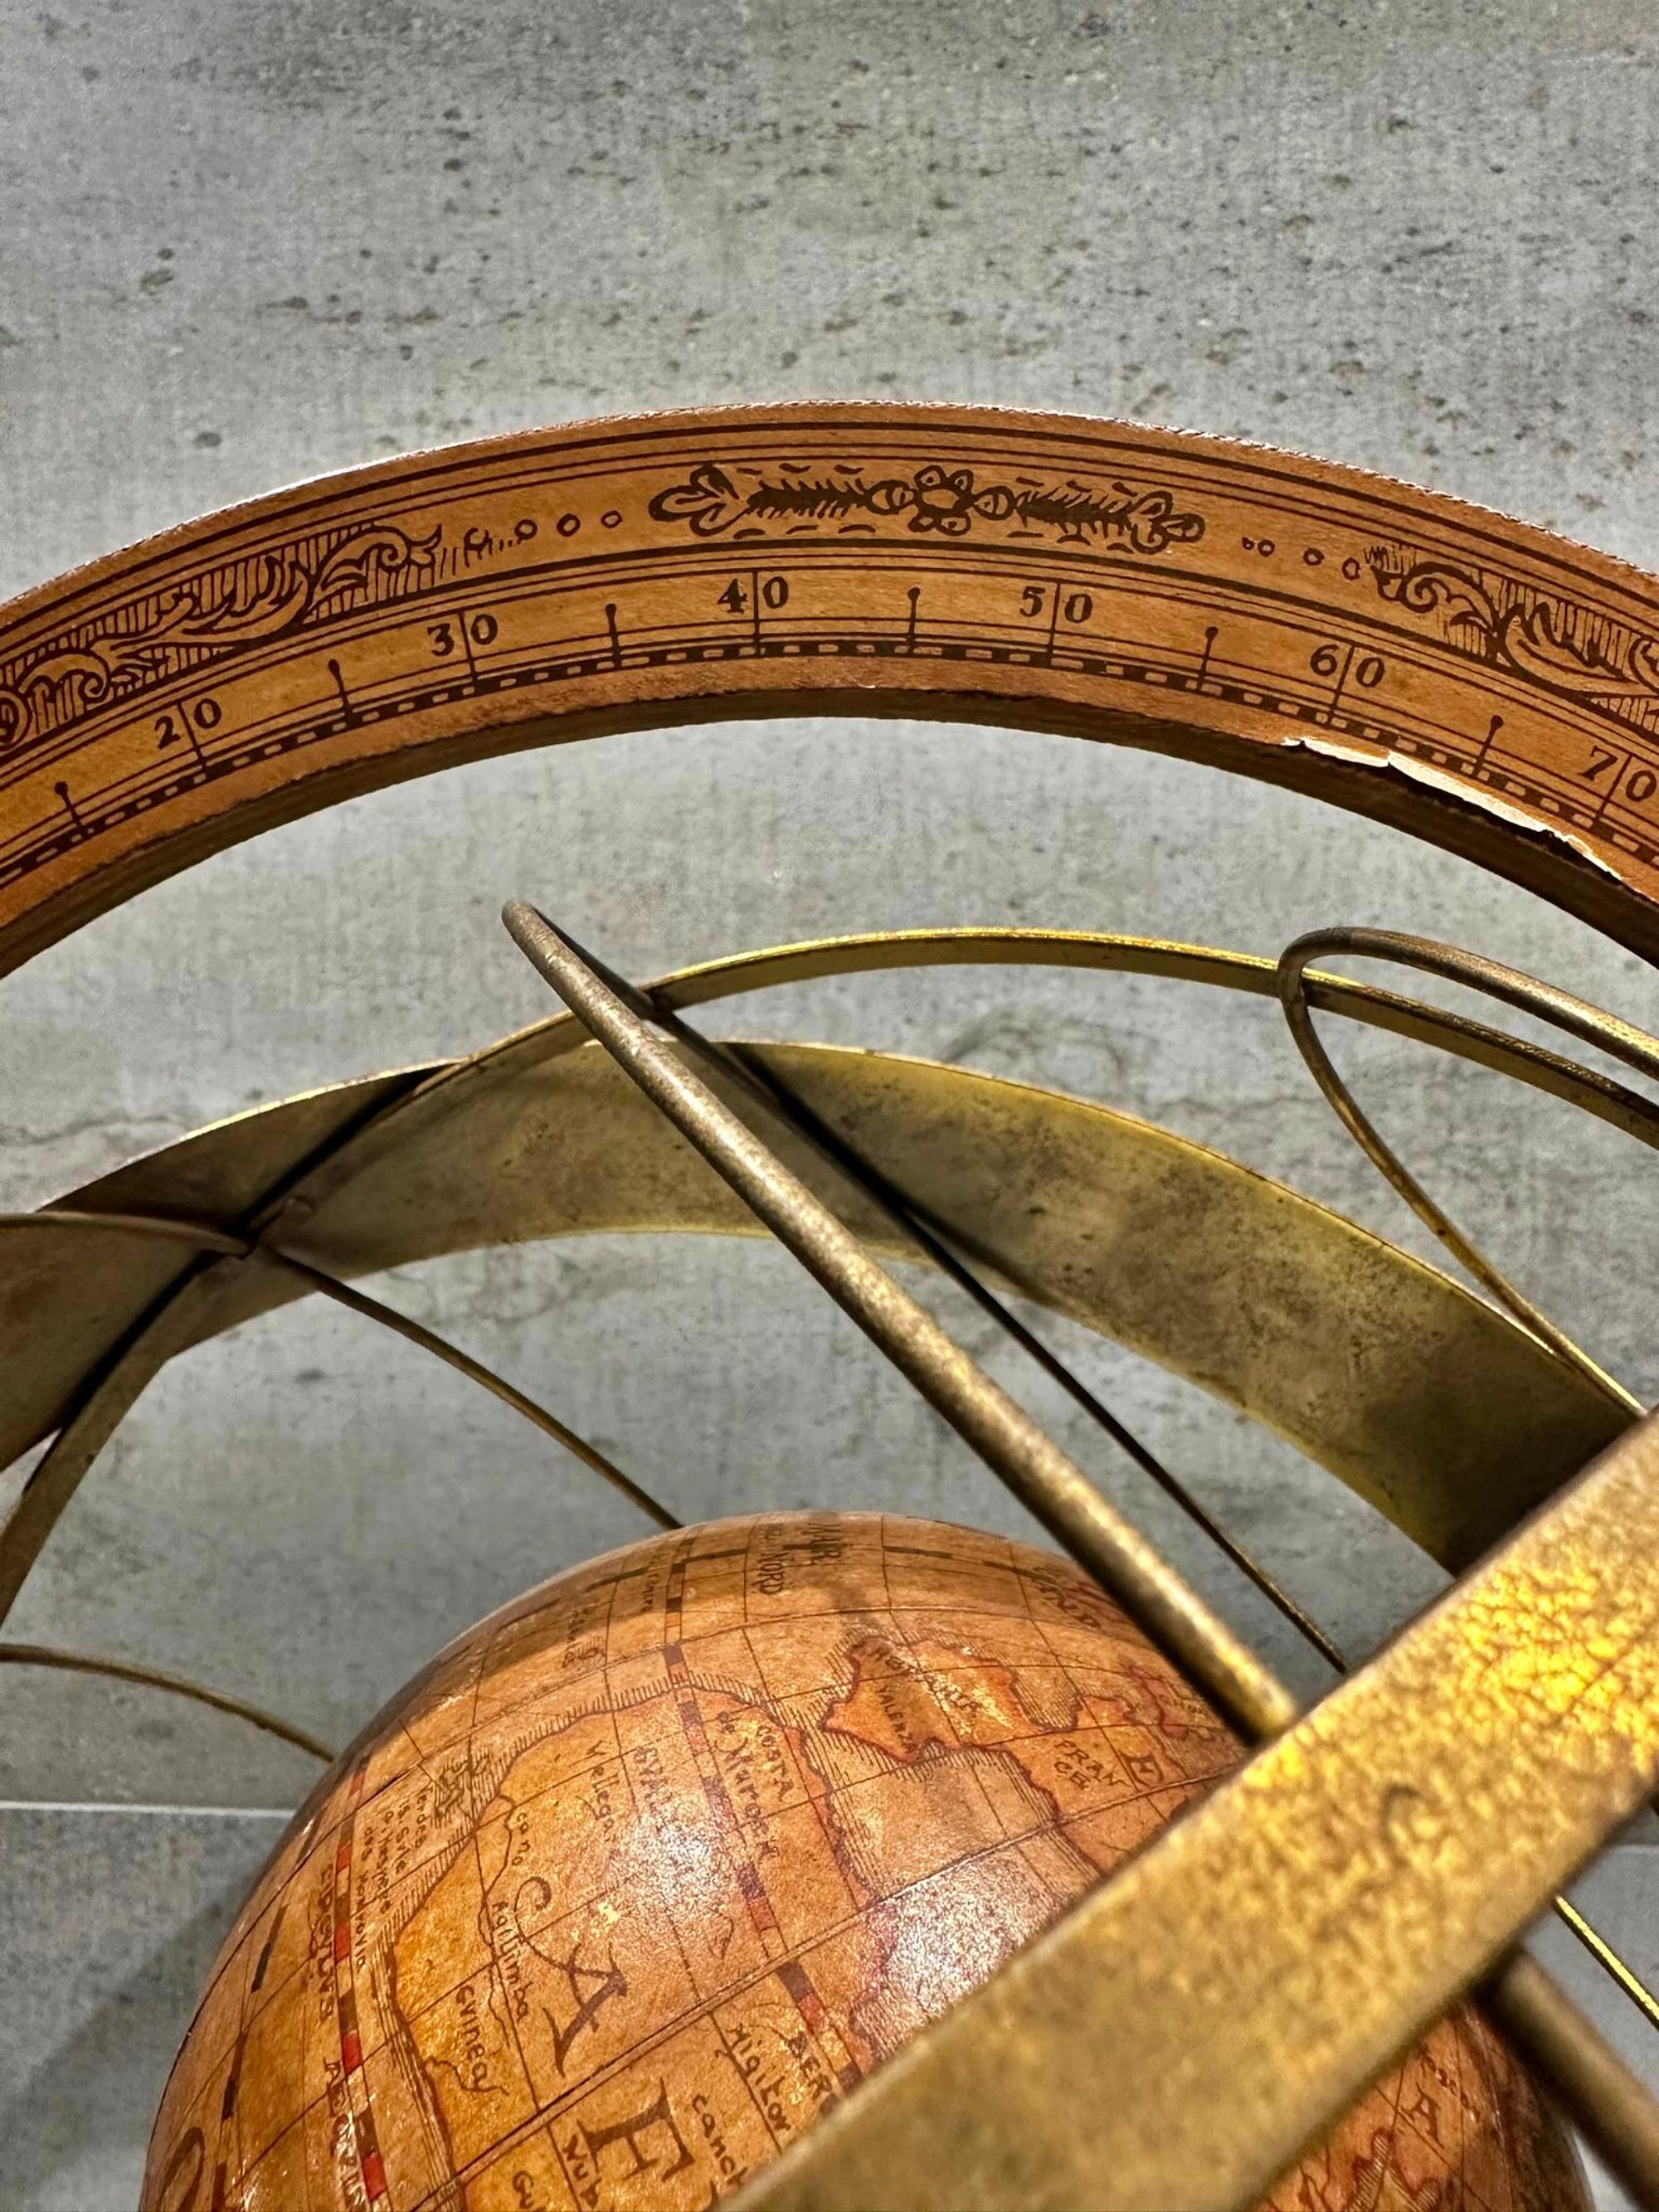 Impressive and Ancient Italian Armillary Sphere from early 20th century, 
handcrafted in wood and metal/golden brass with a base on 3 solid wood legs. 
Certificate of authenticity. 
A true unique collector's item. 
Measurements: 90 cm high, 45